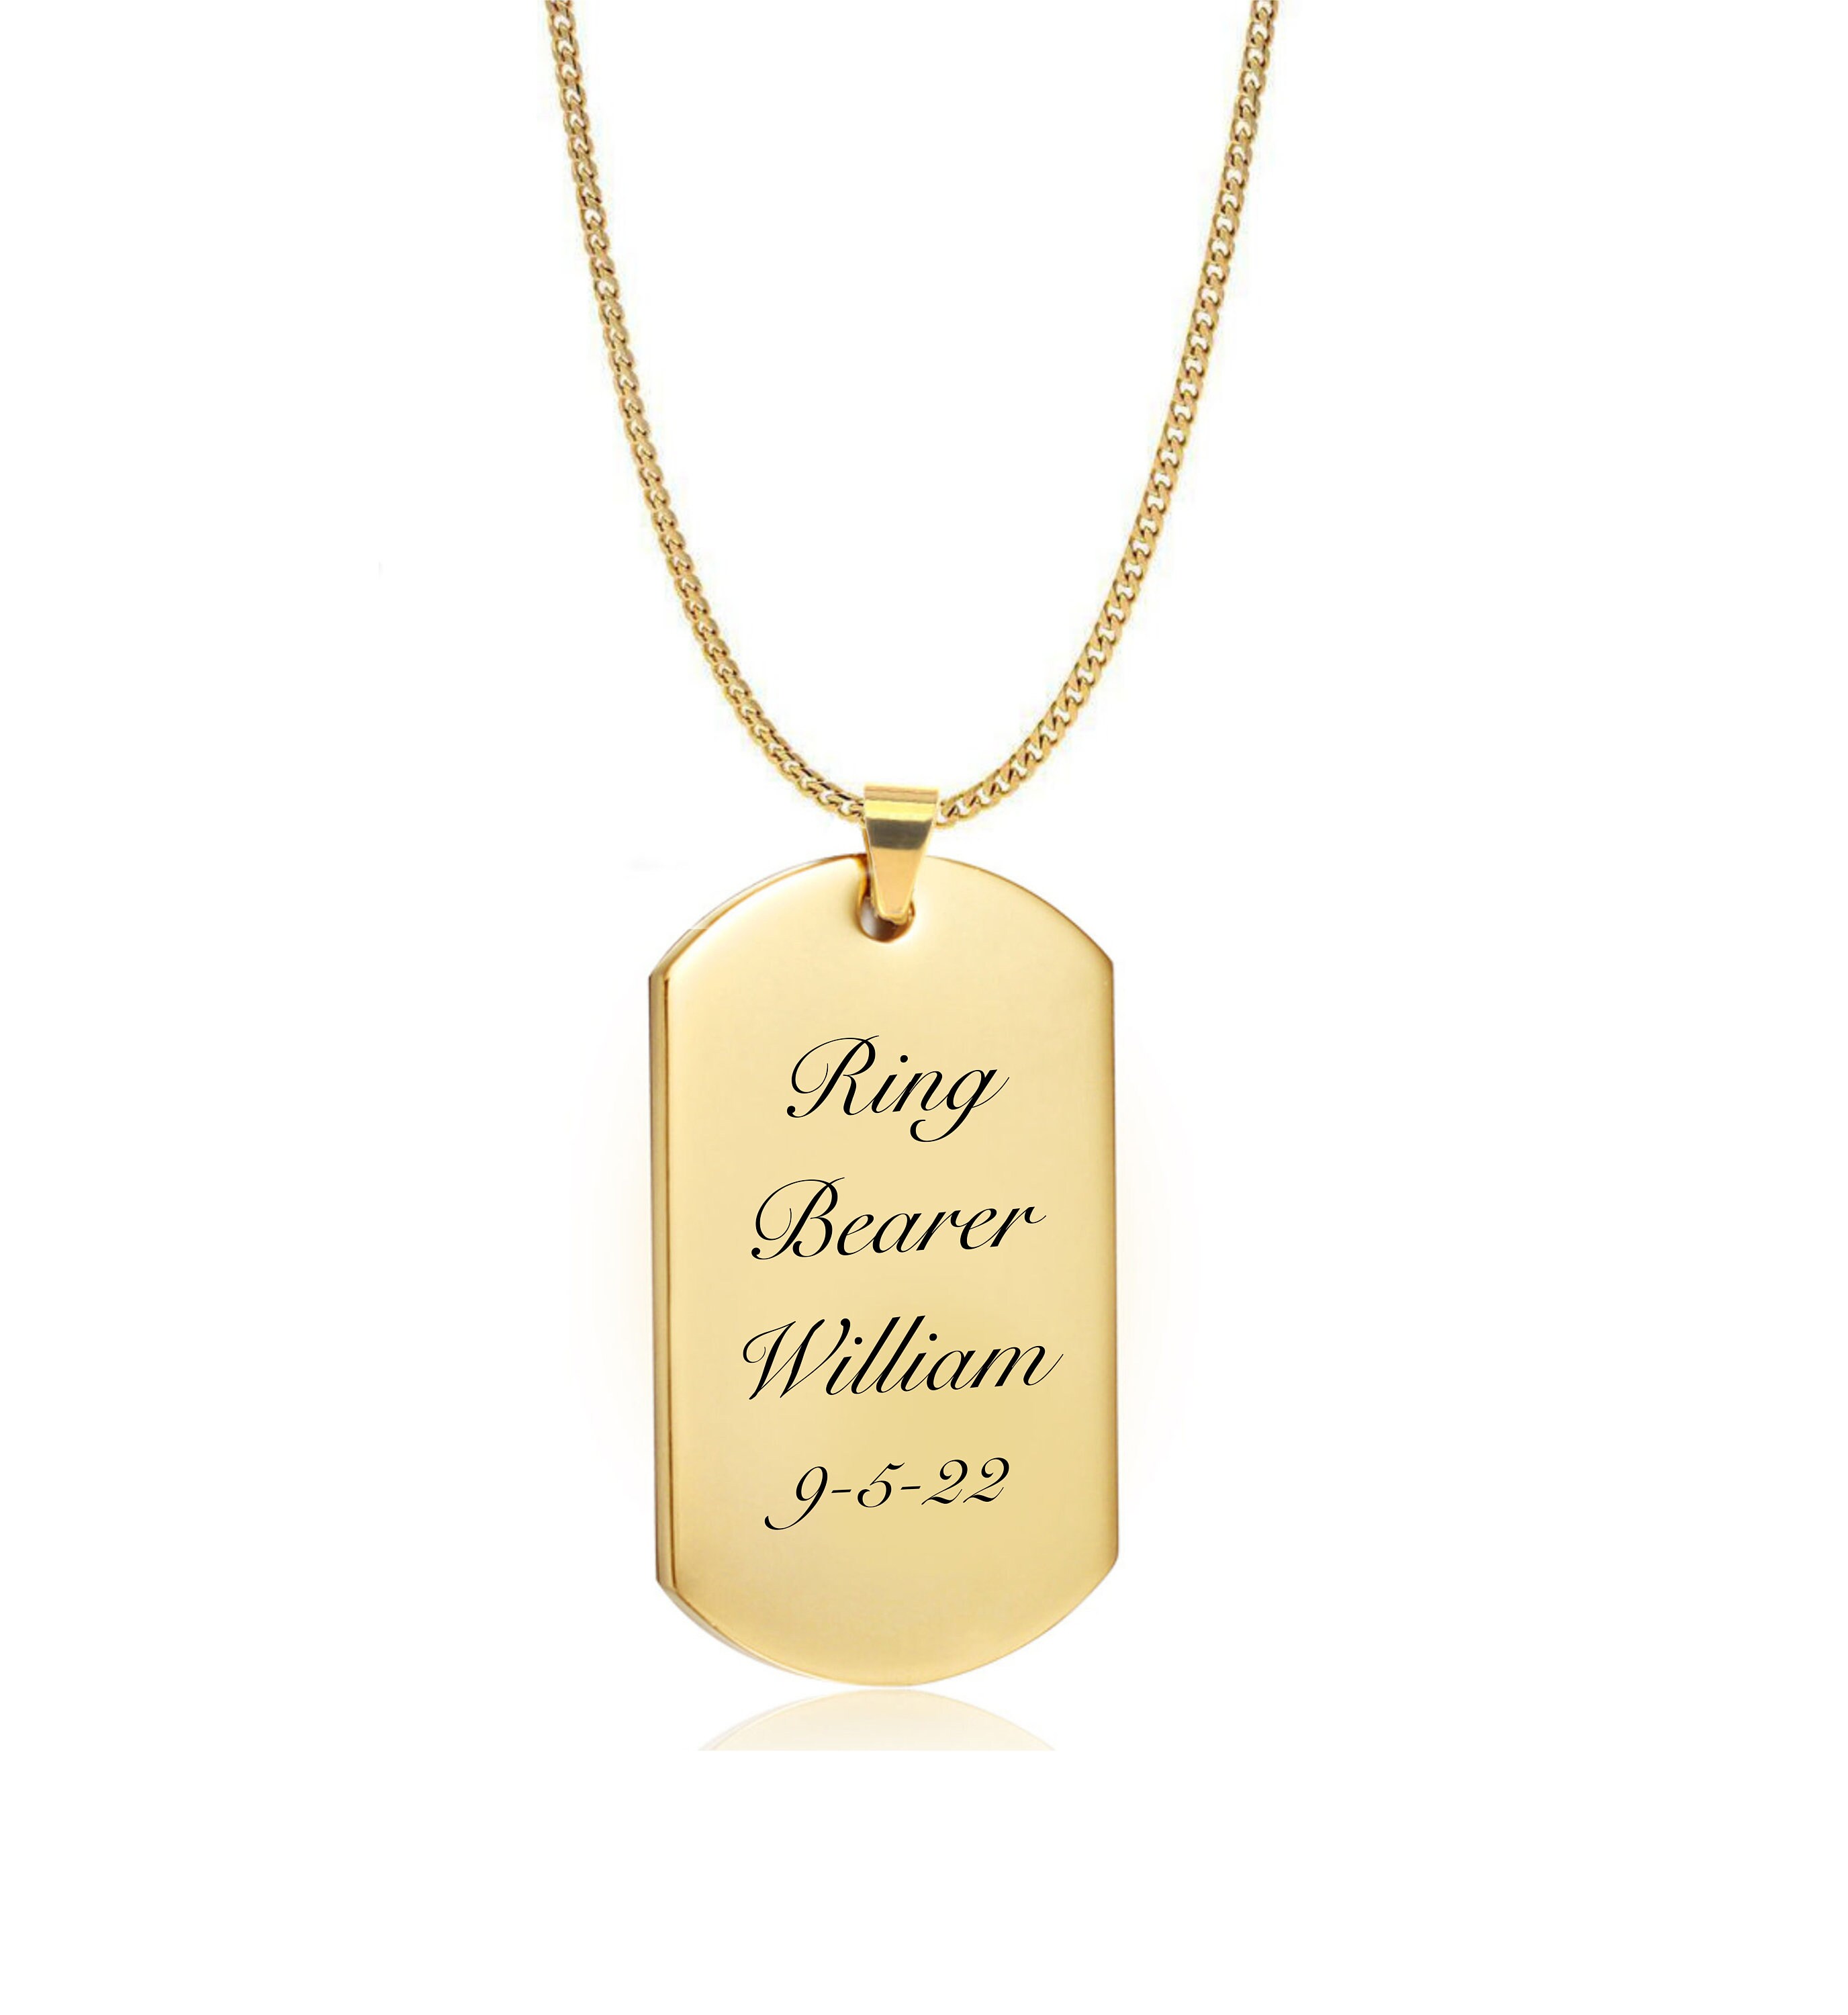 18K Gold Dog Tag Necklace Custom Dog Tag Personalized Engraved Solid 18K Gold Pendant for Men Gift Christmas for Women